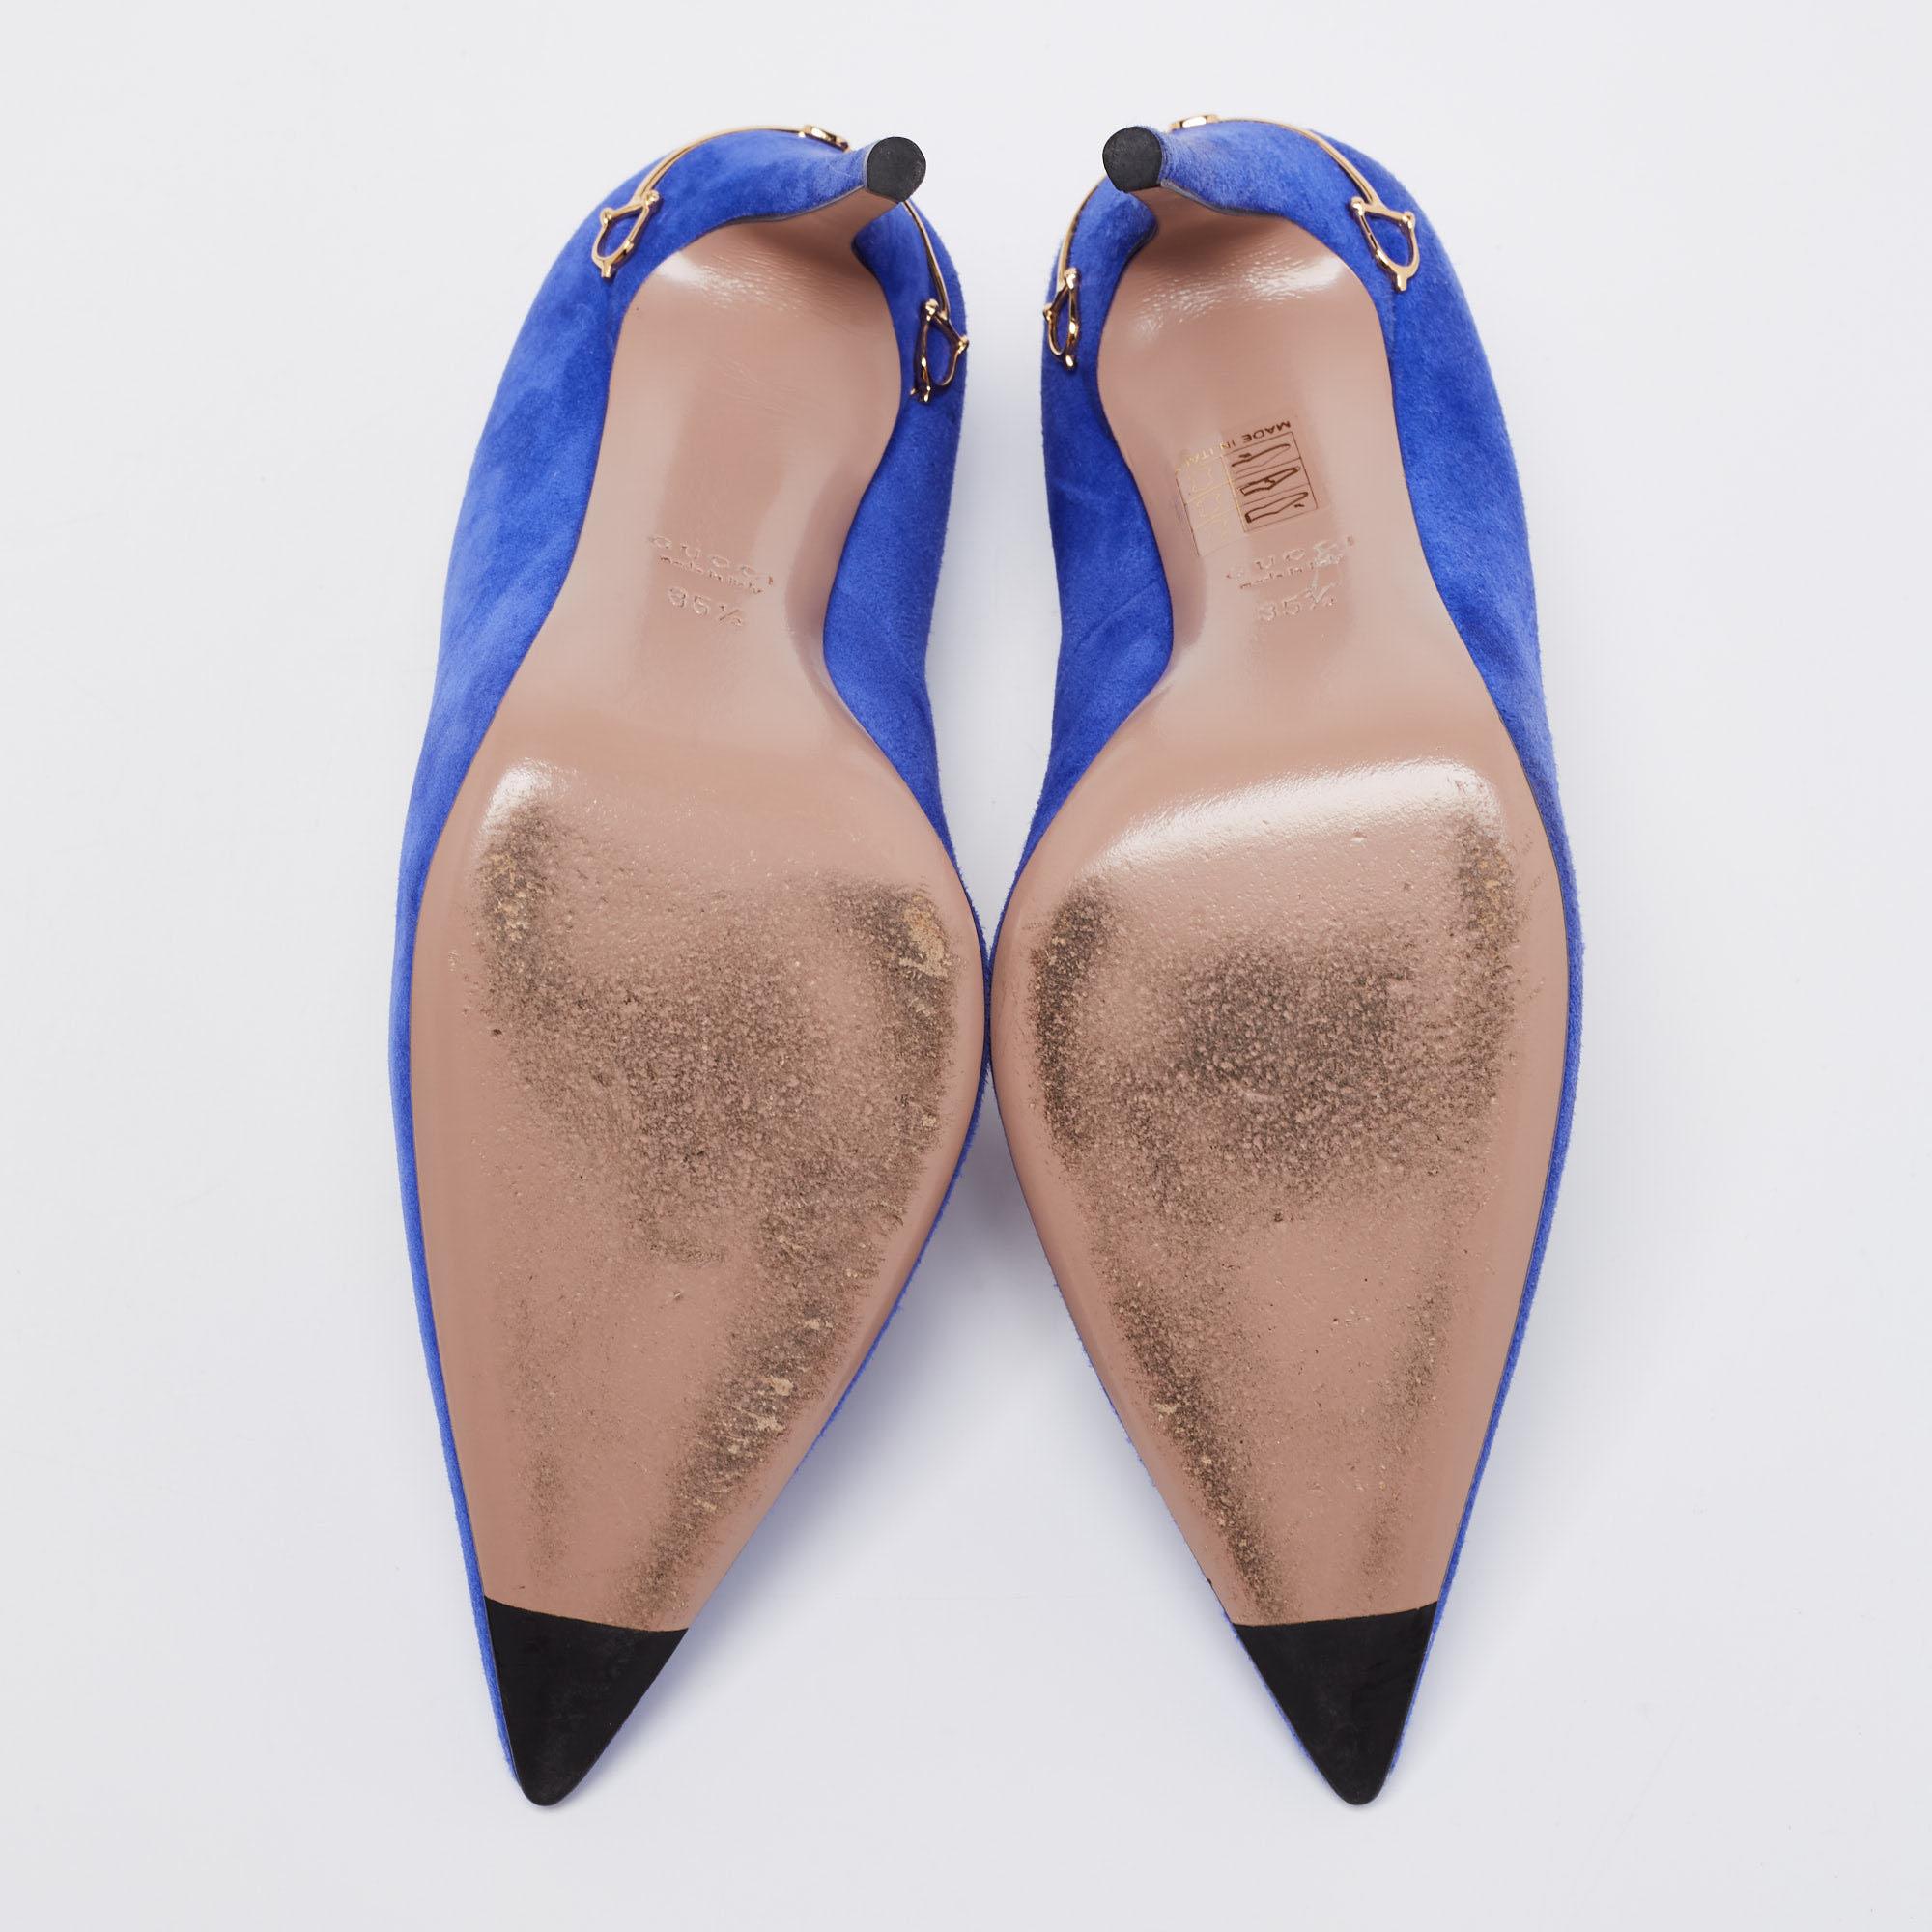 Gucci Blue Suede Pointed Toe Pumps Size 35.5 For Sale 4